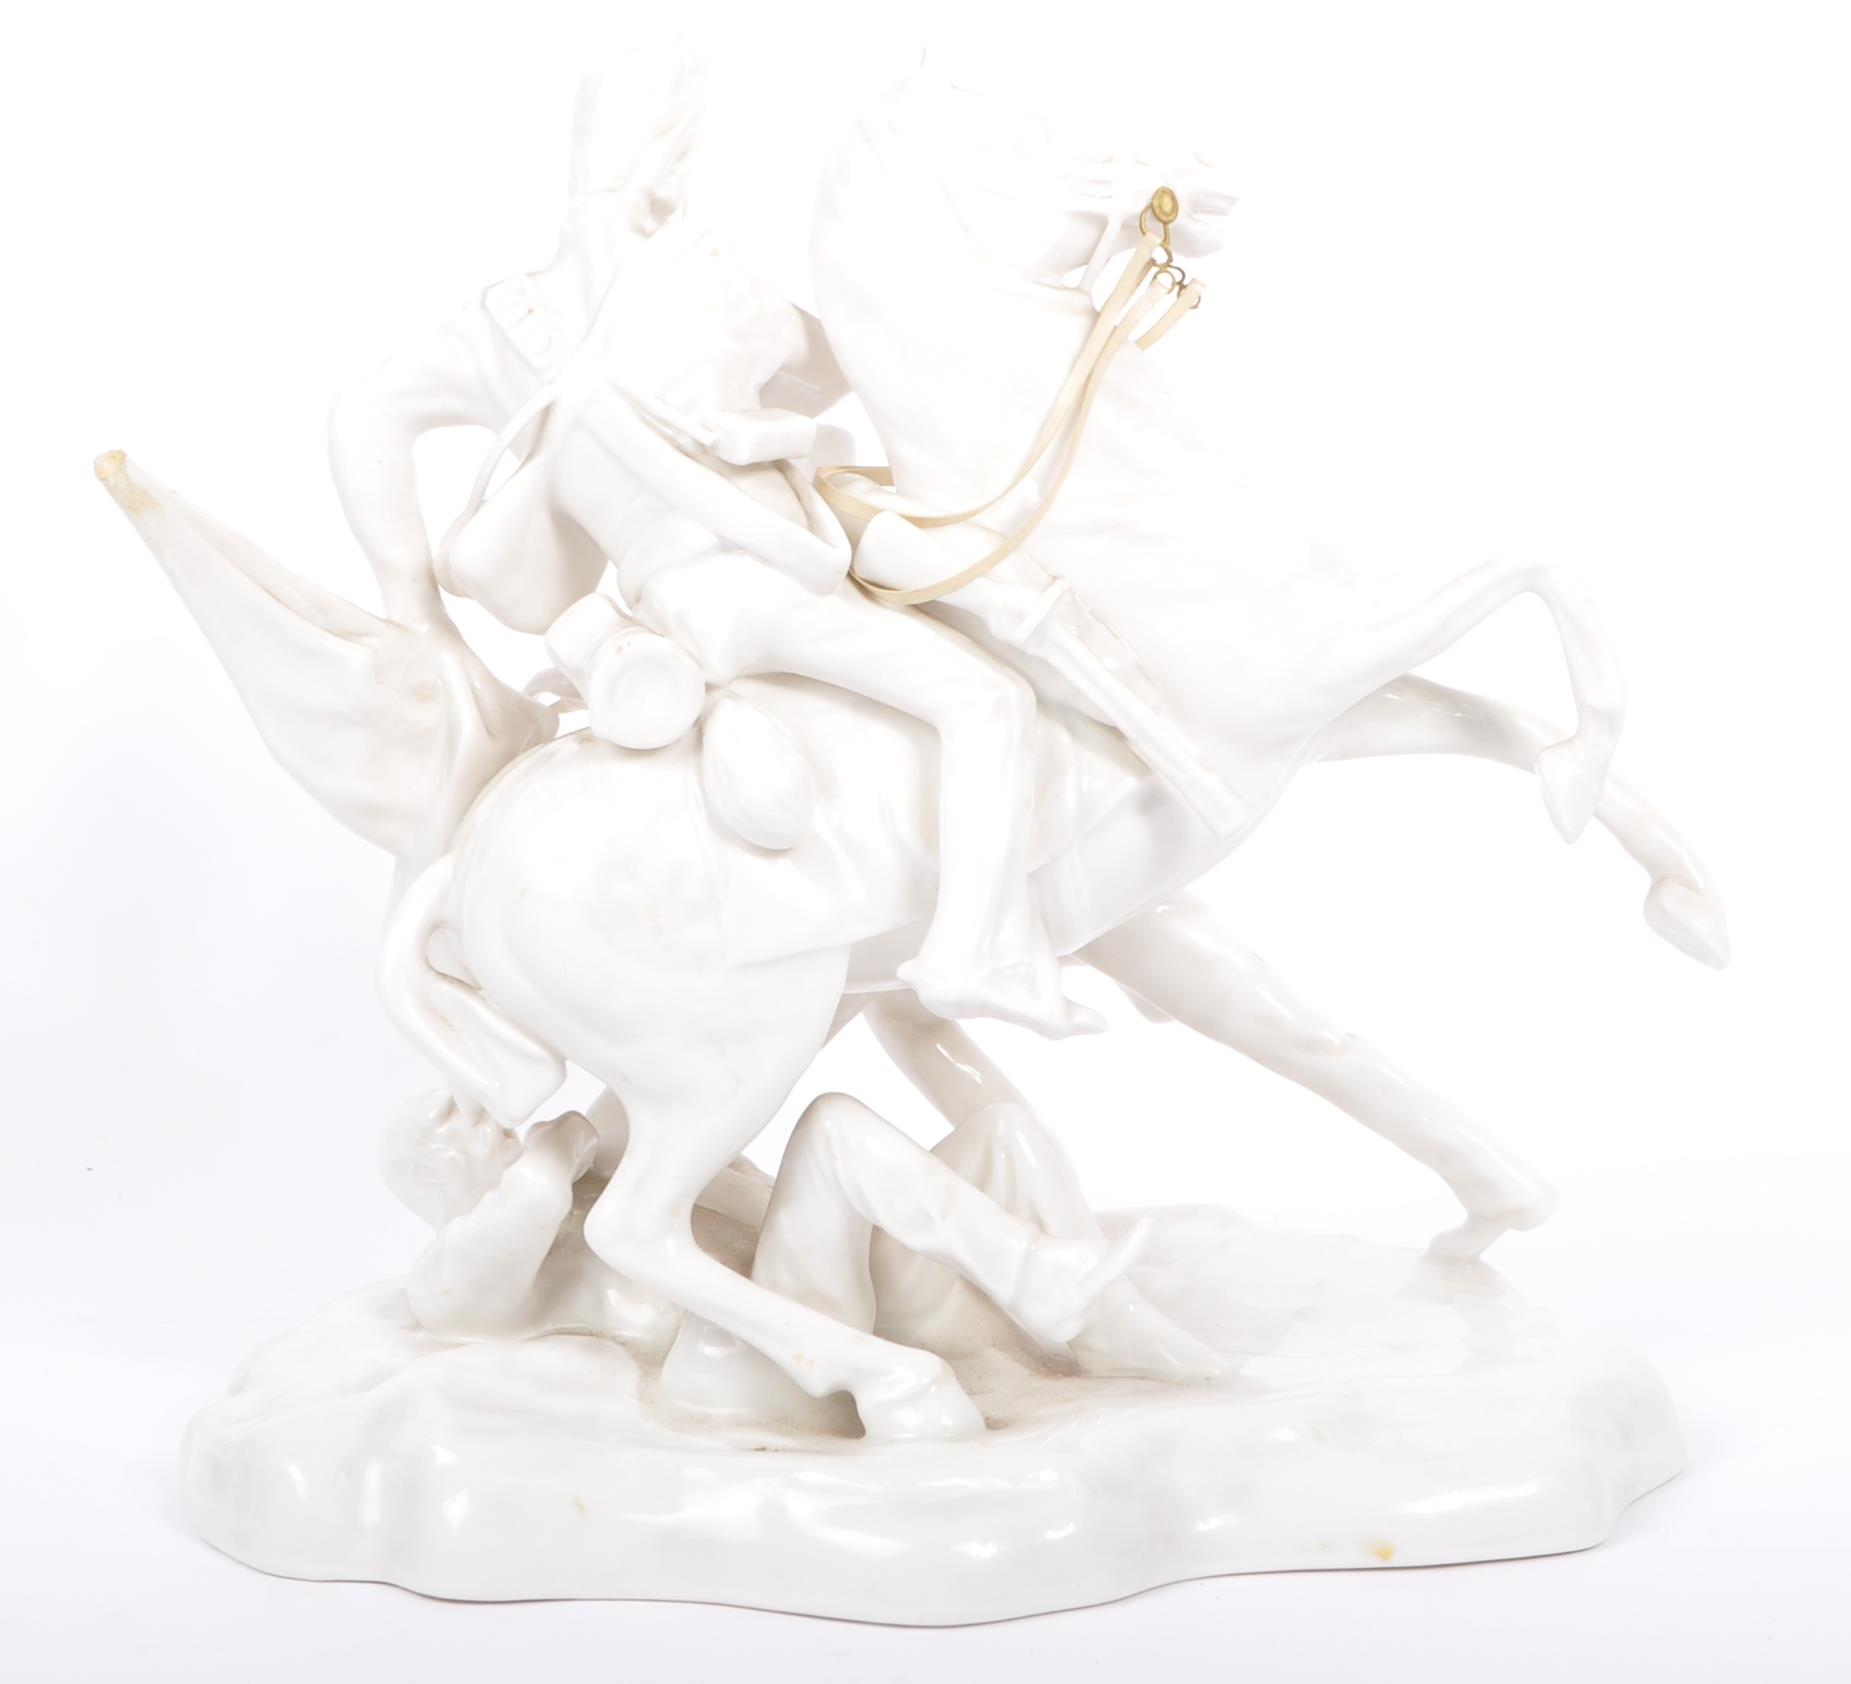 MICHEAL SUTTY PORCELAIN MILITARY FIGURE - FACTORY PROTOTYPE - Image 4 of 5